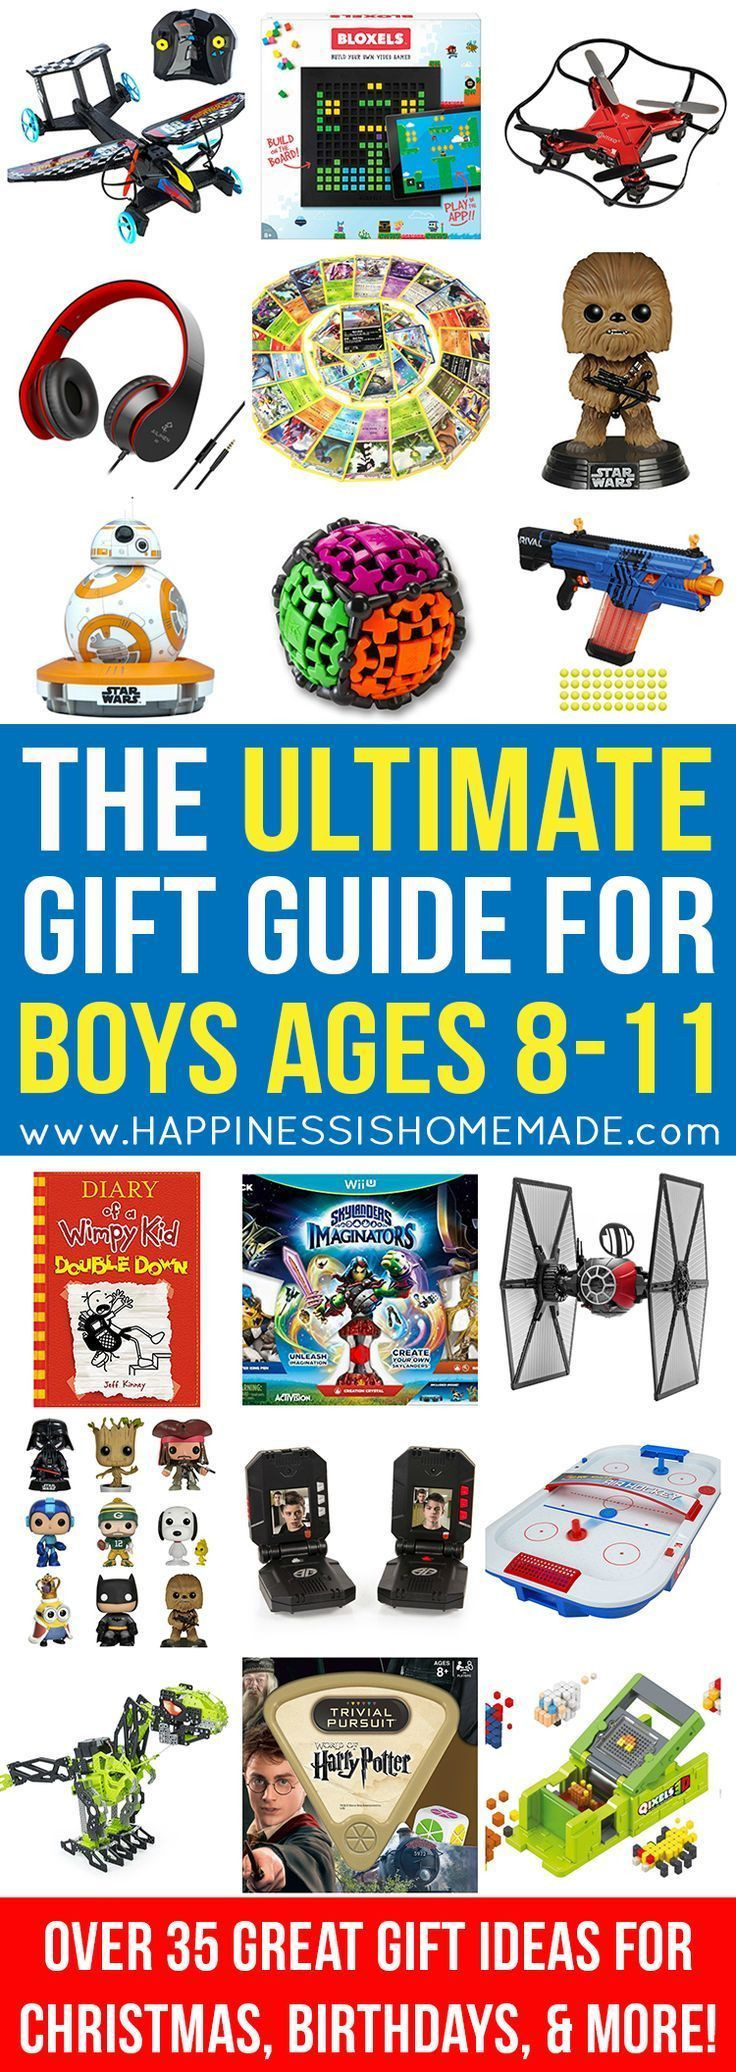 Christmas Gift Ideas For 9 Year Old Boy
 10 images about Best Toys for 9 Year Old Boys on